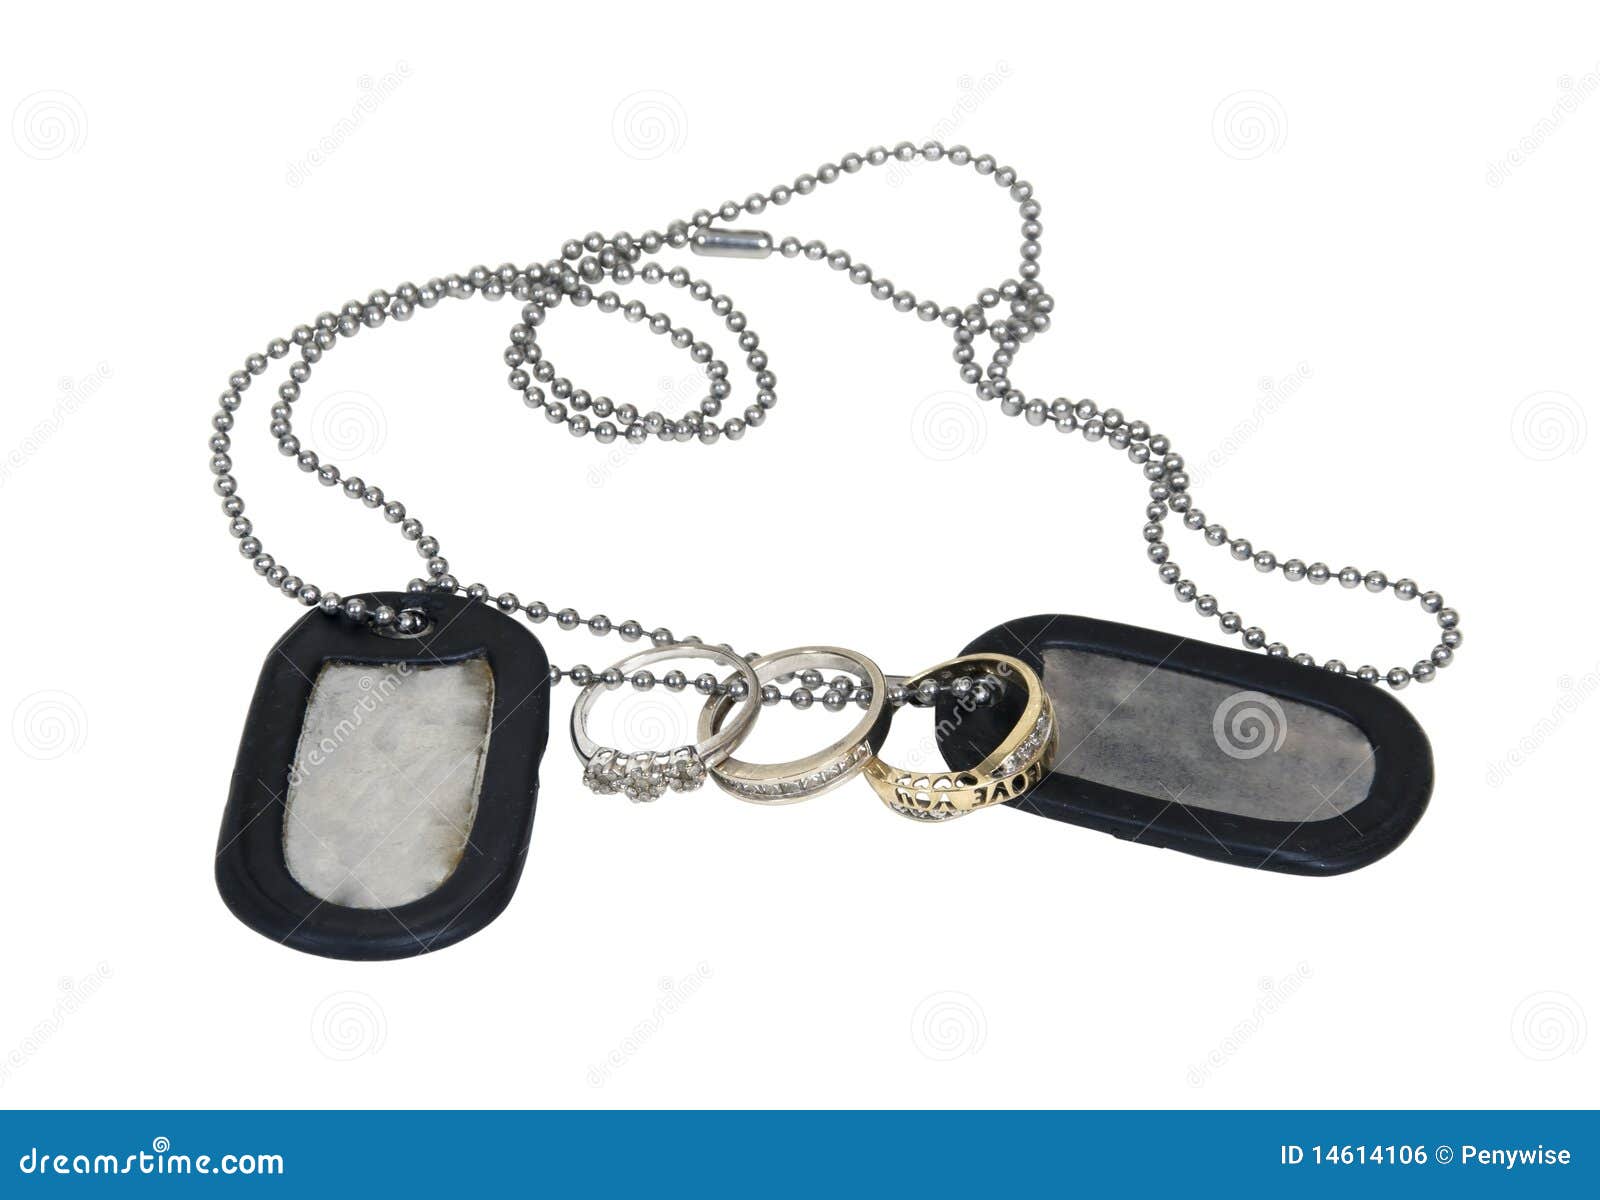 Military Dog Tags and Wedding Ring Stock Photo - Image of wedding,  marriage: 14614106